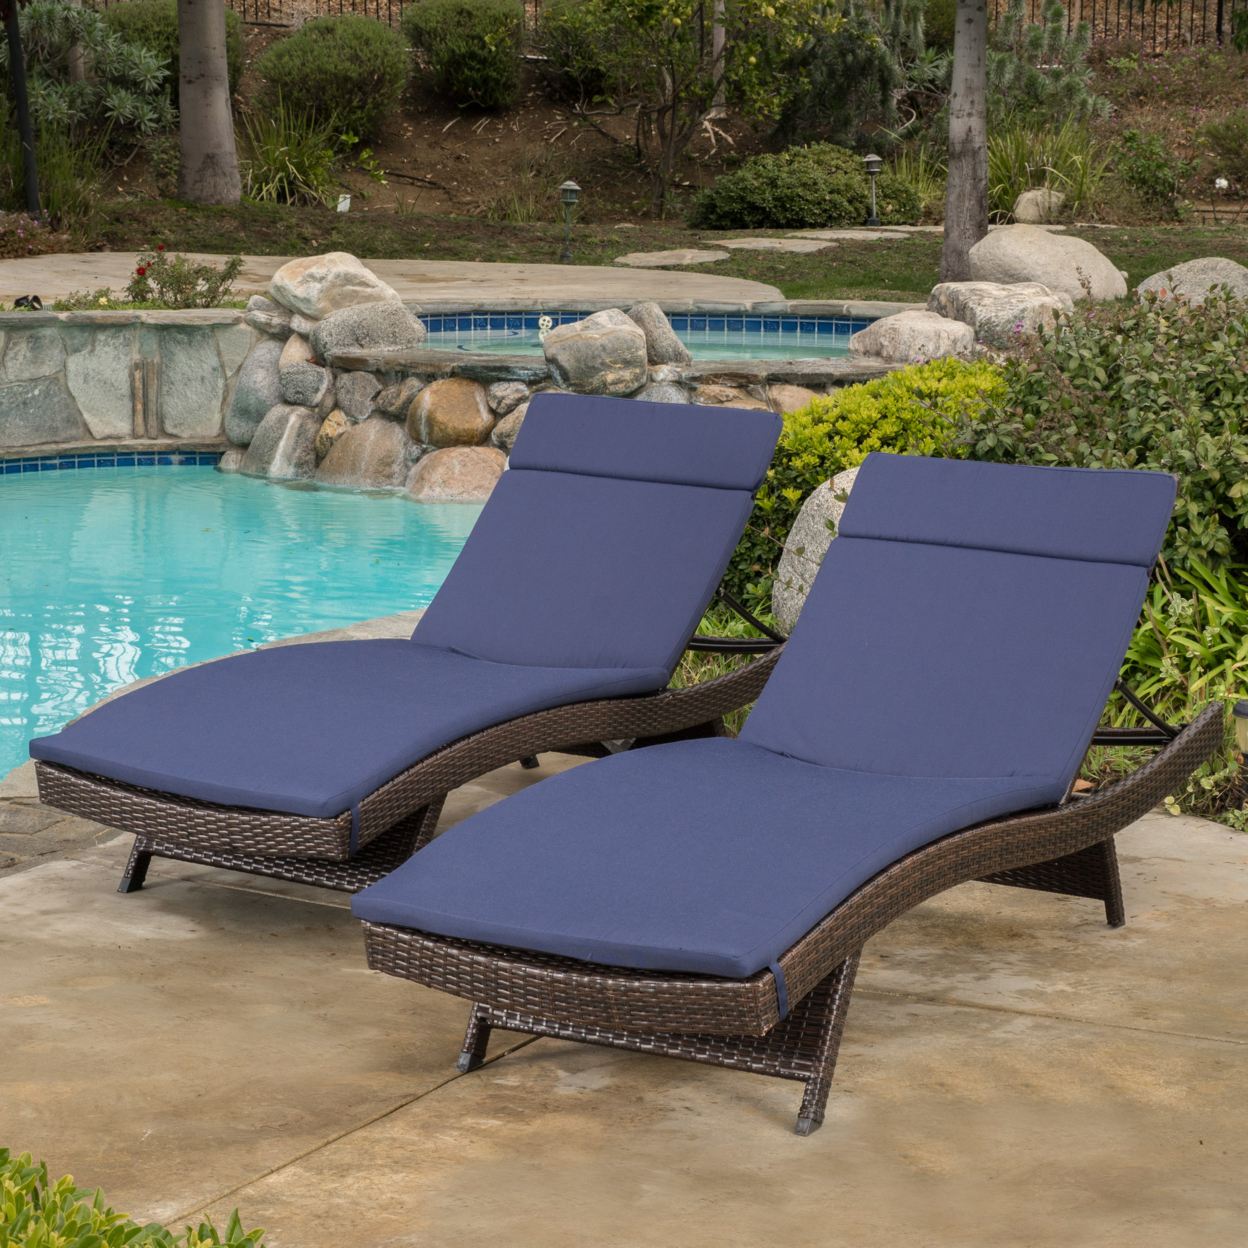 Lakeport Outdoor Adjustable Chaise Lounge Chairs With Cushions (set Of 2) - Beige